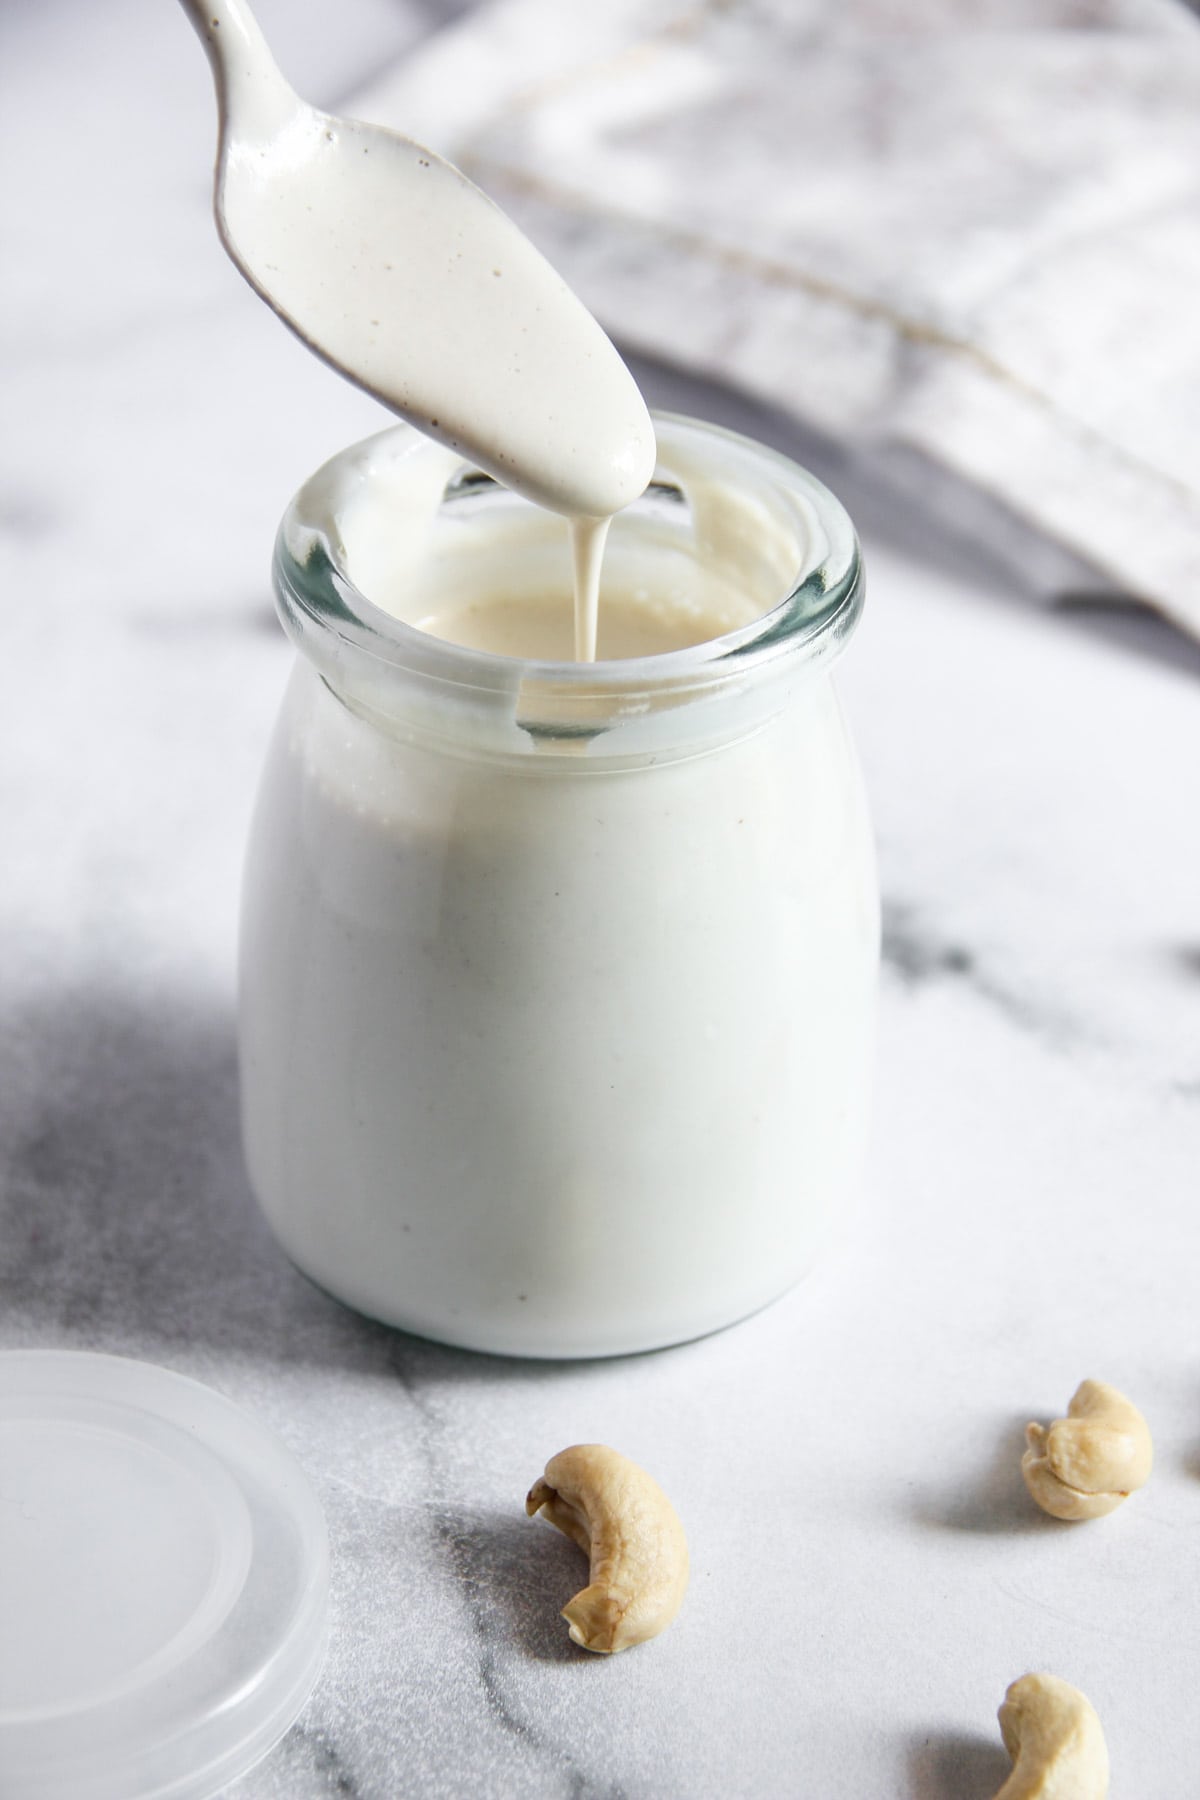 cashew cream dripping from a spoon into a glass bottle